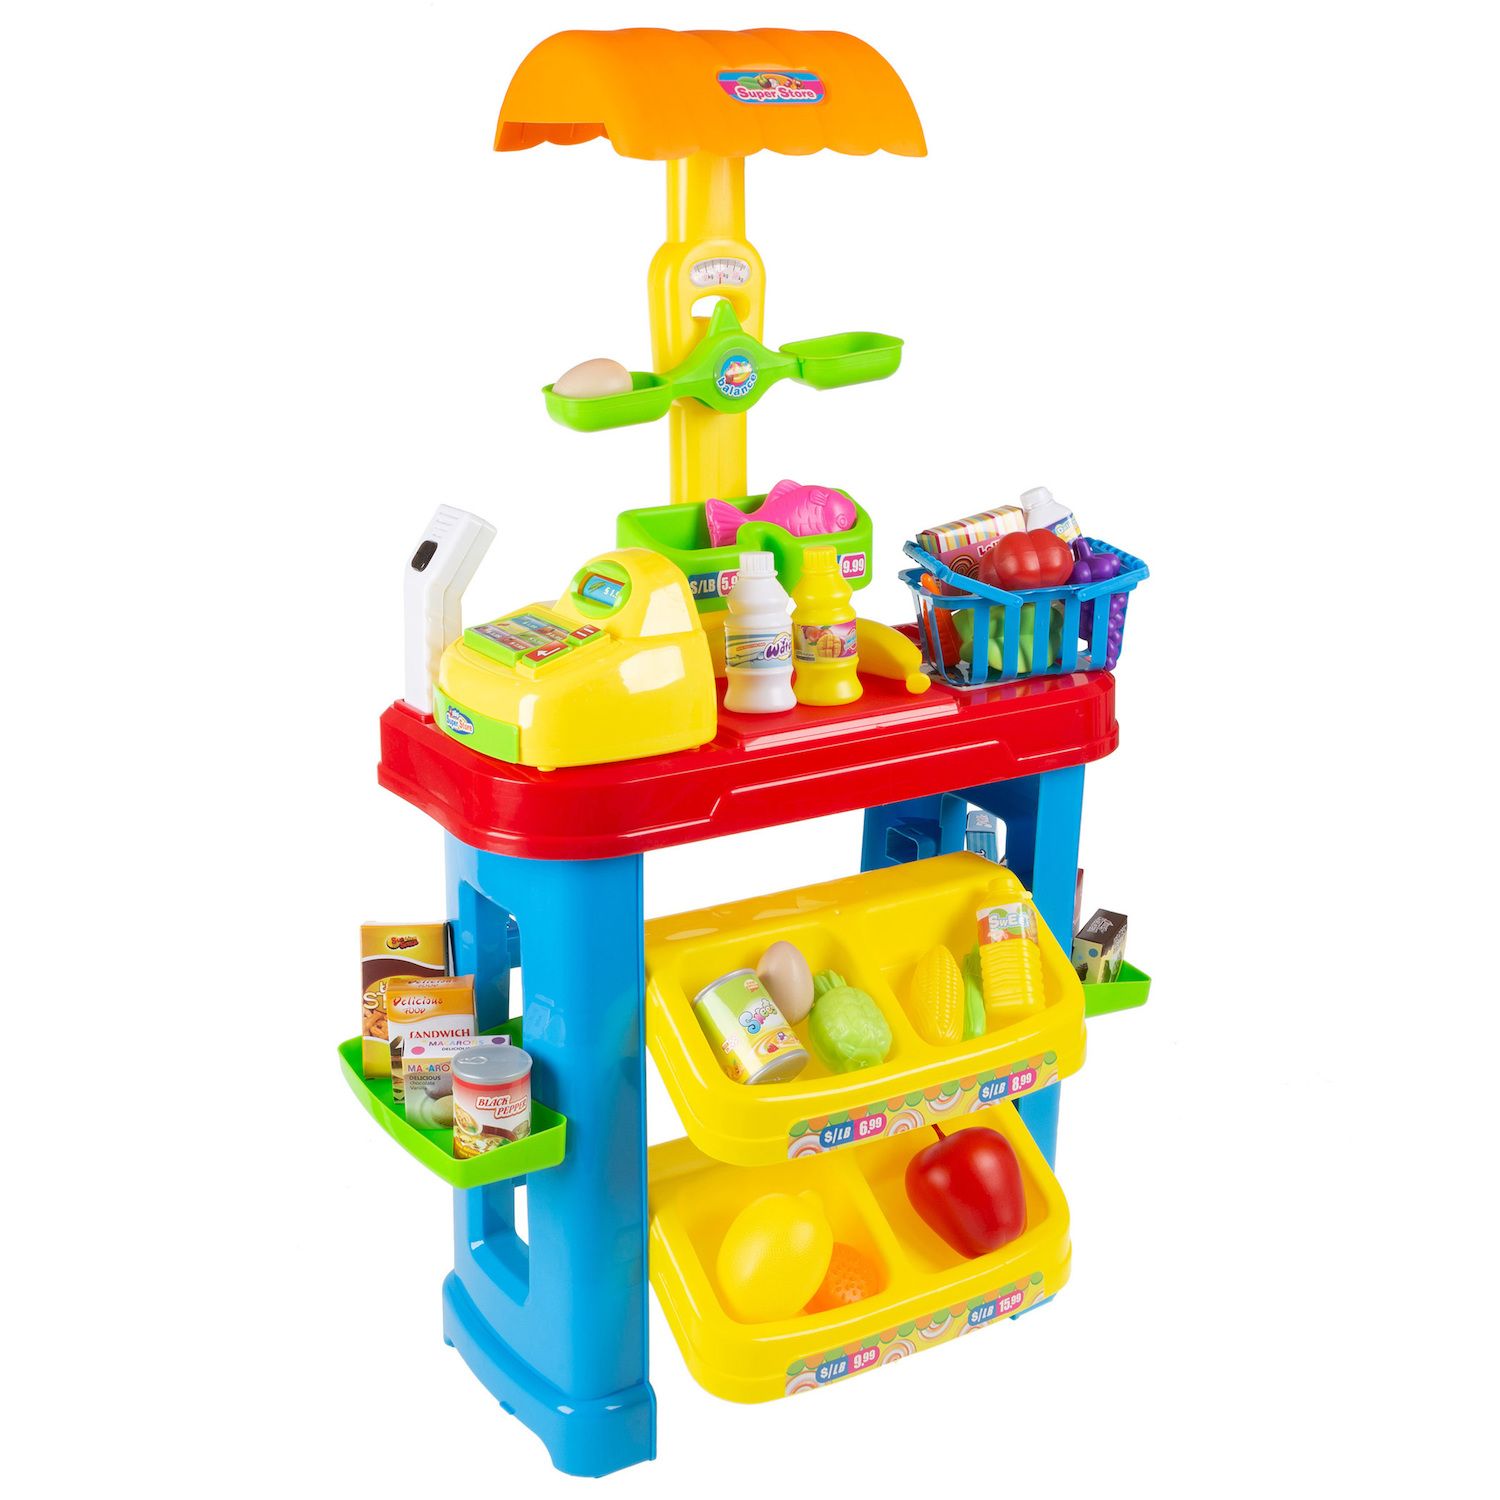 Image for Hey! Play! Kids Grocery Store Selling Stand Playset at Kohl's.